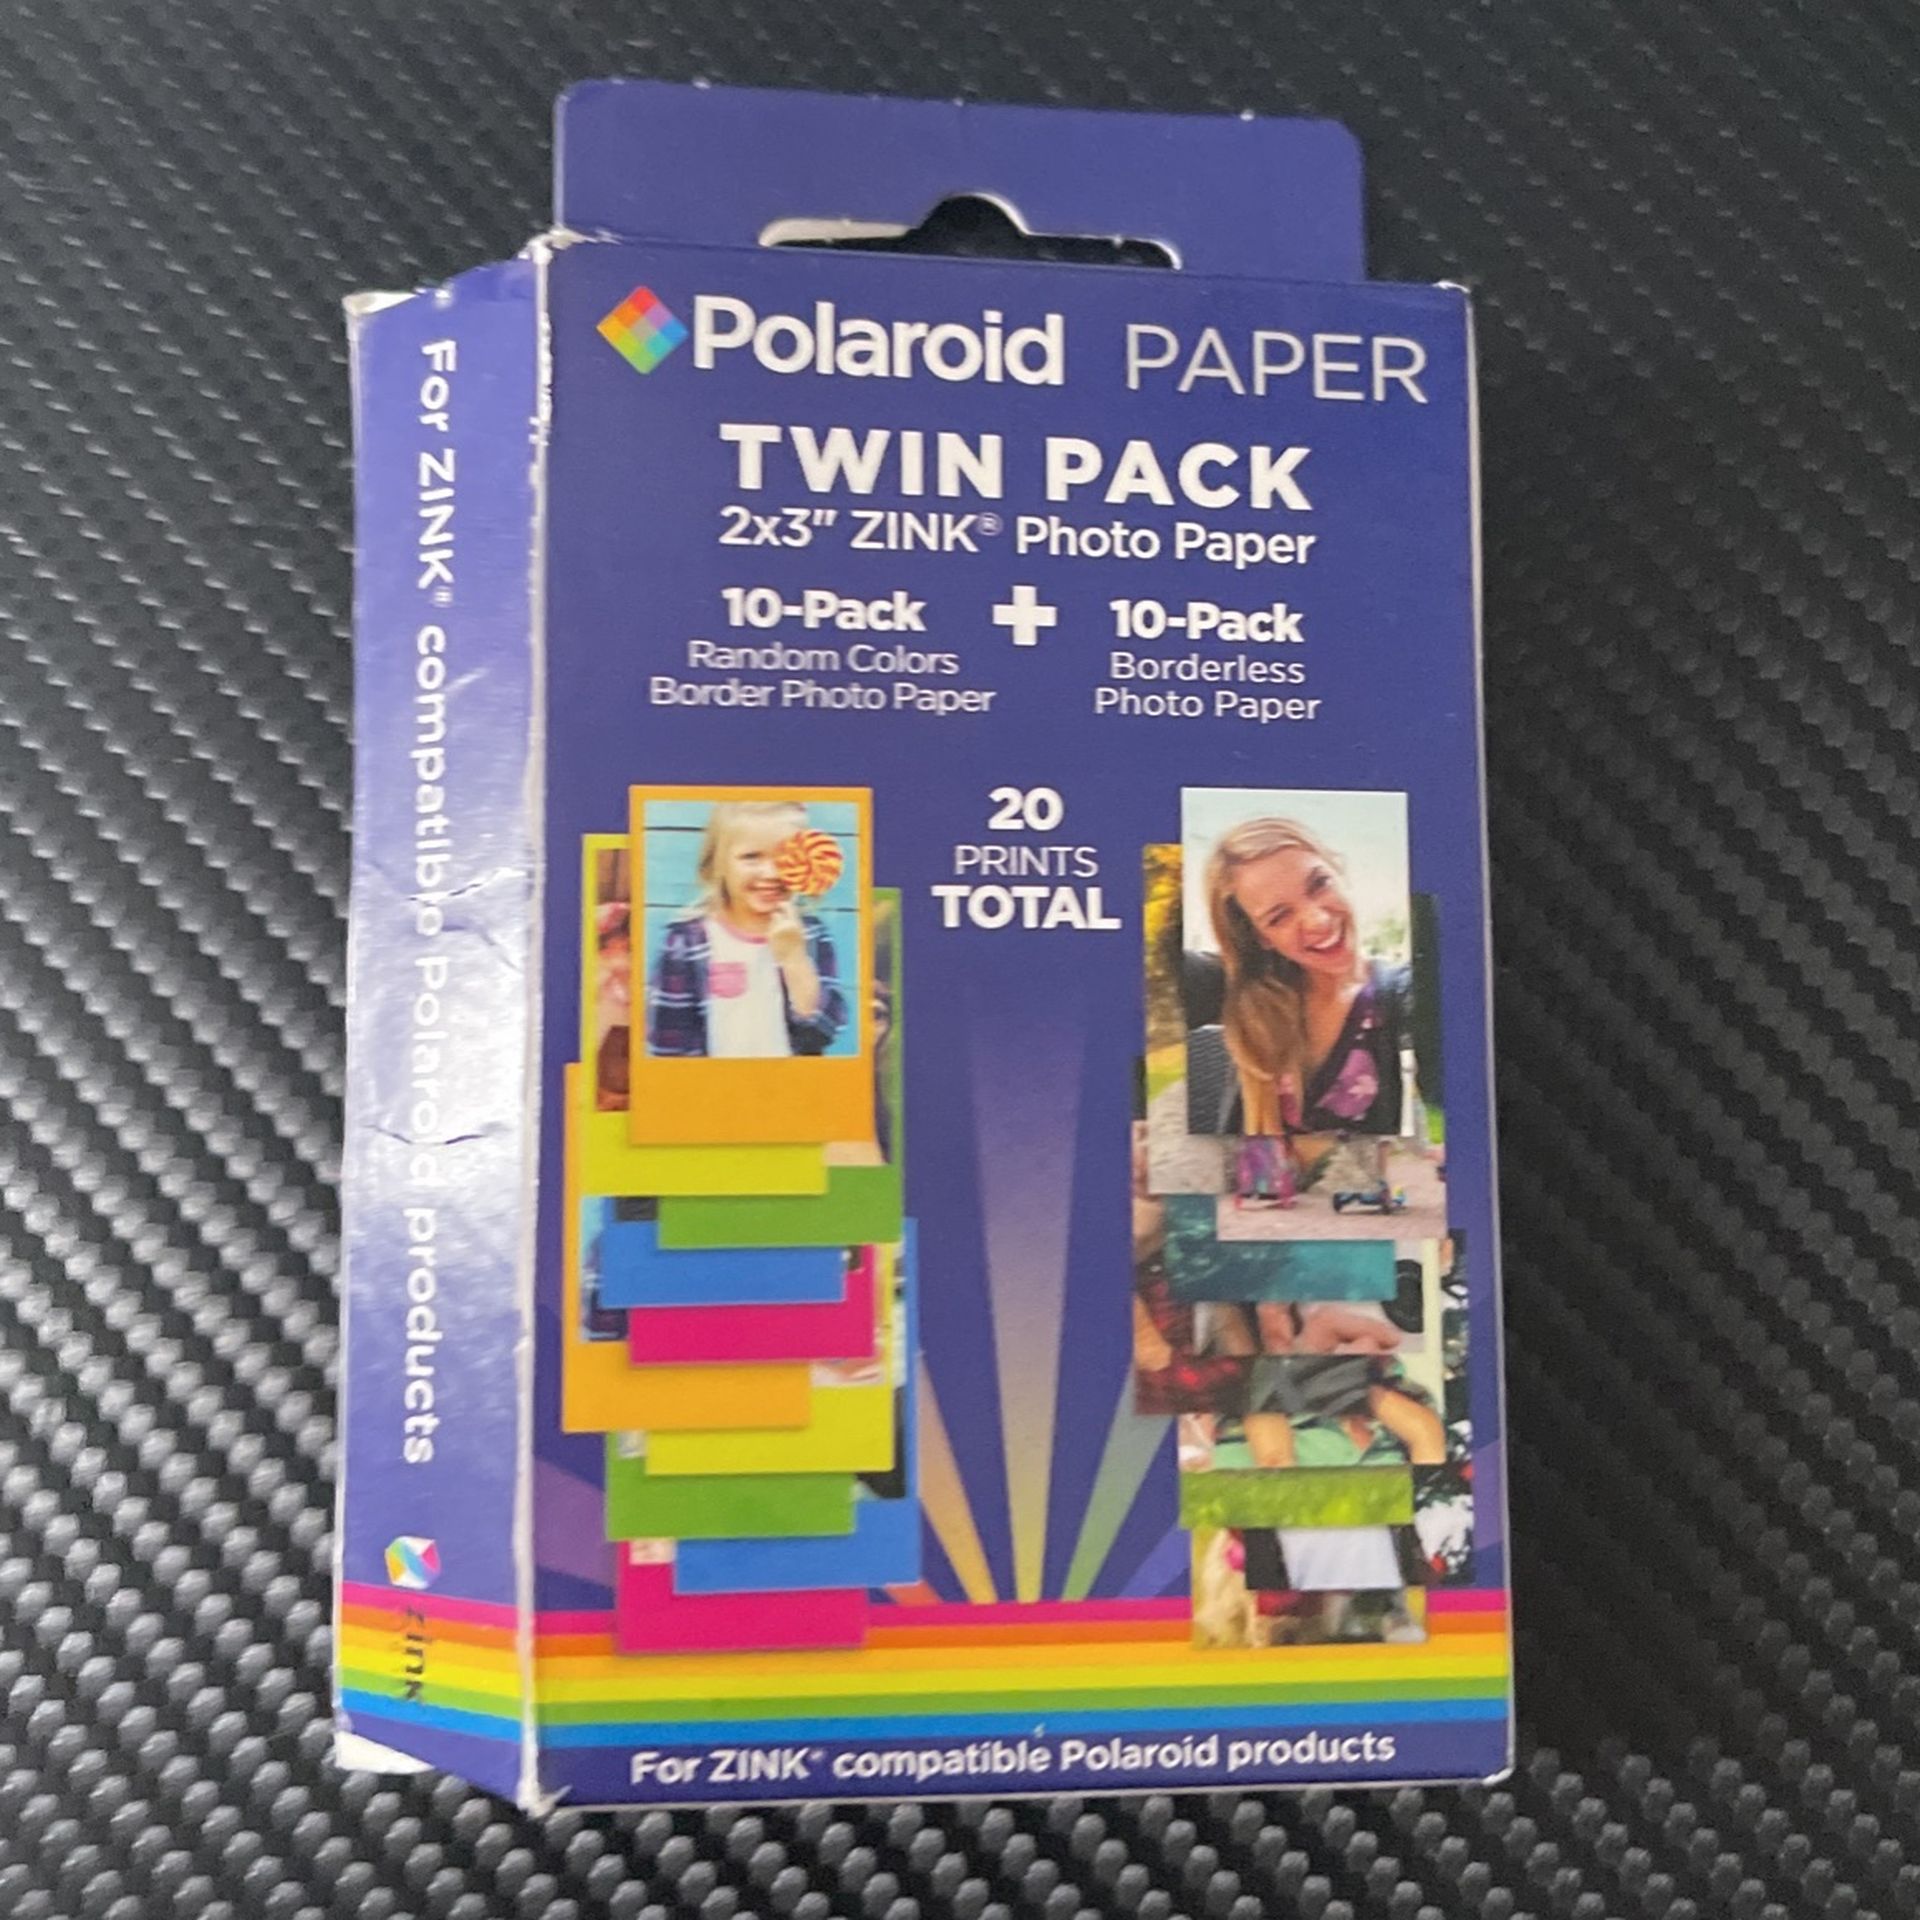 Polaroid paper (just Pay Shipping)